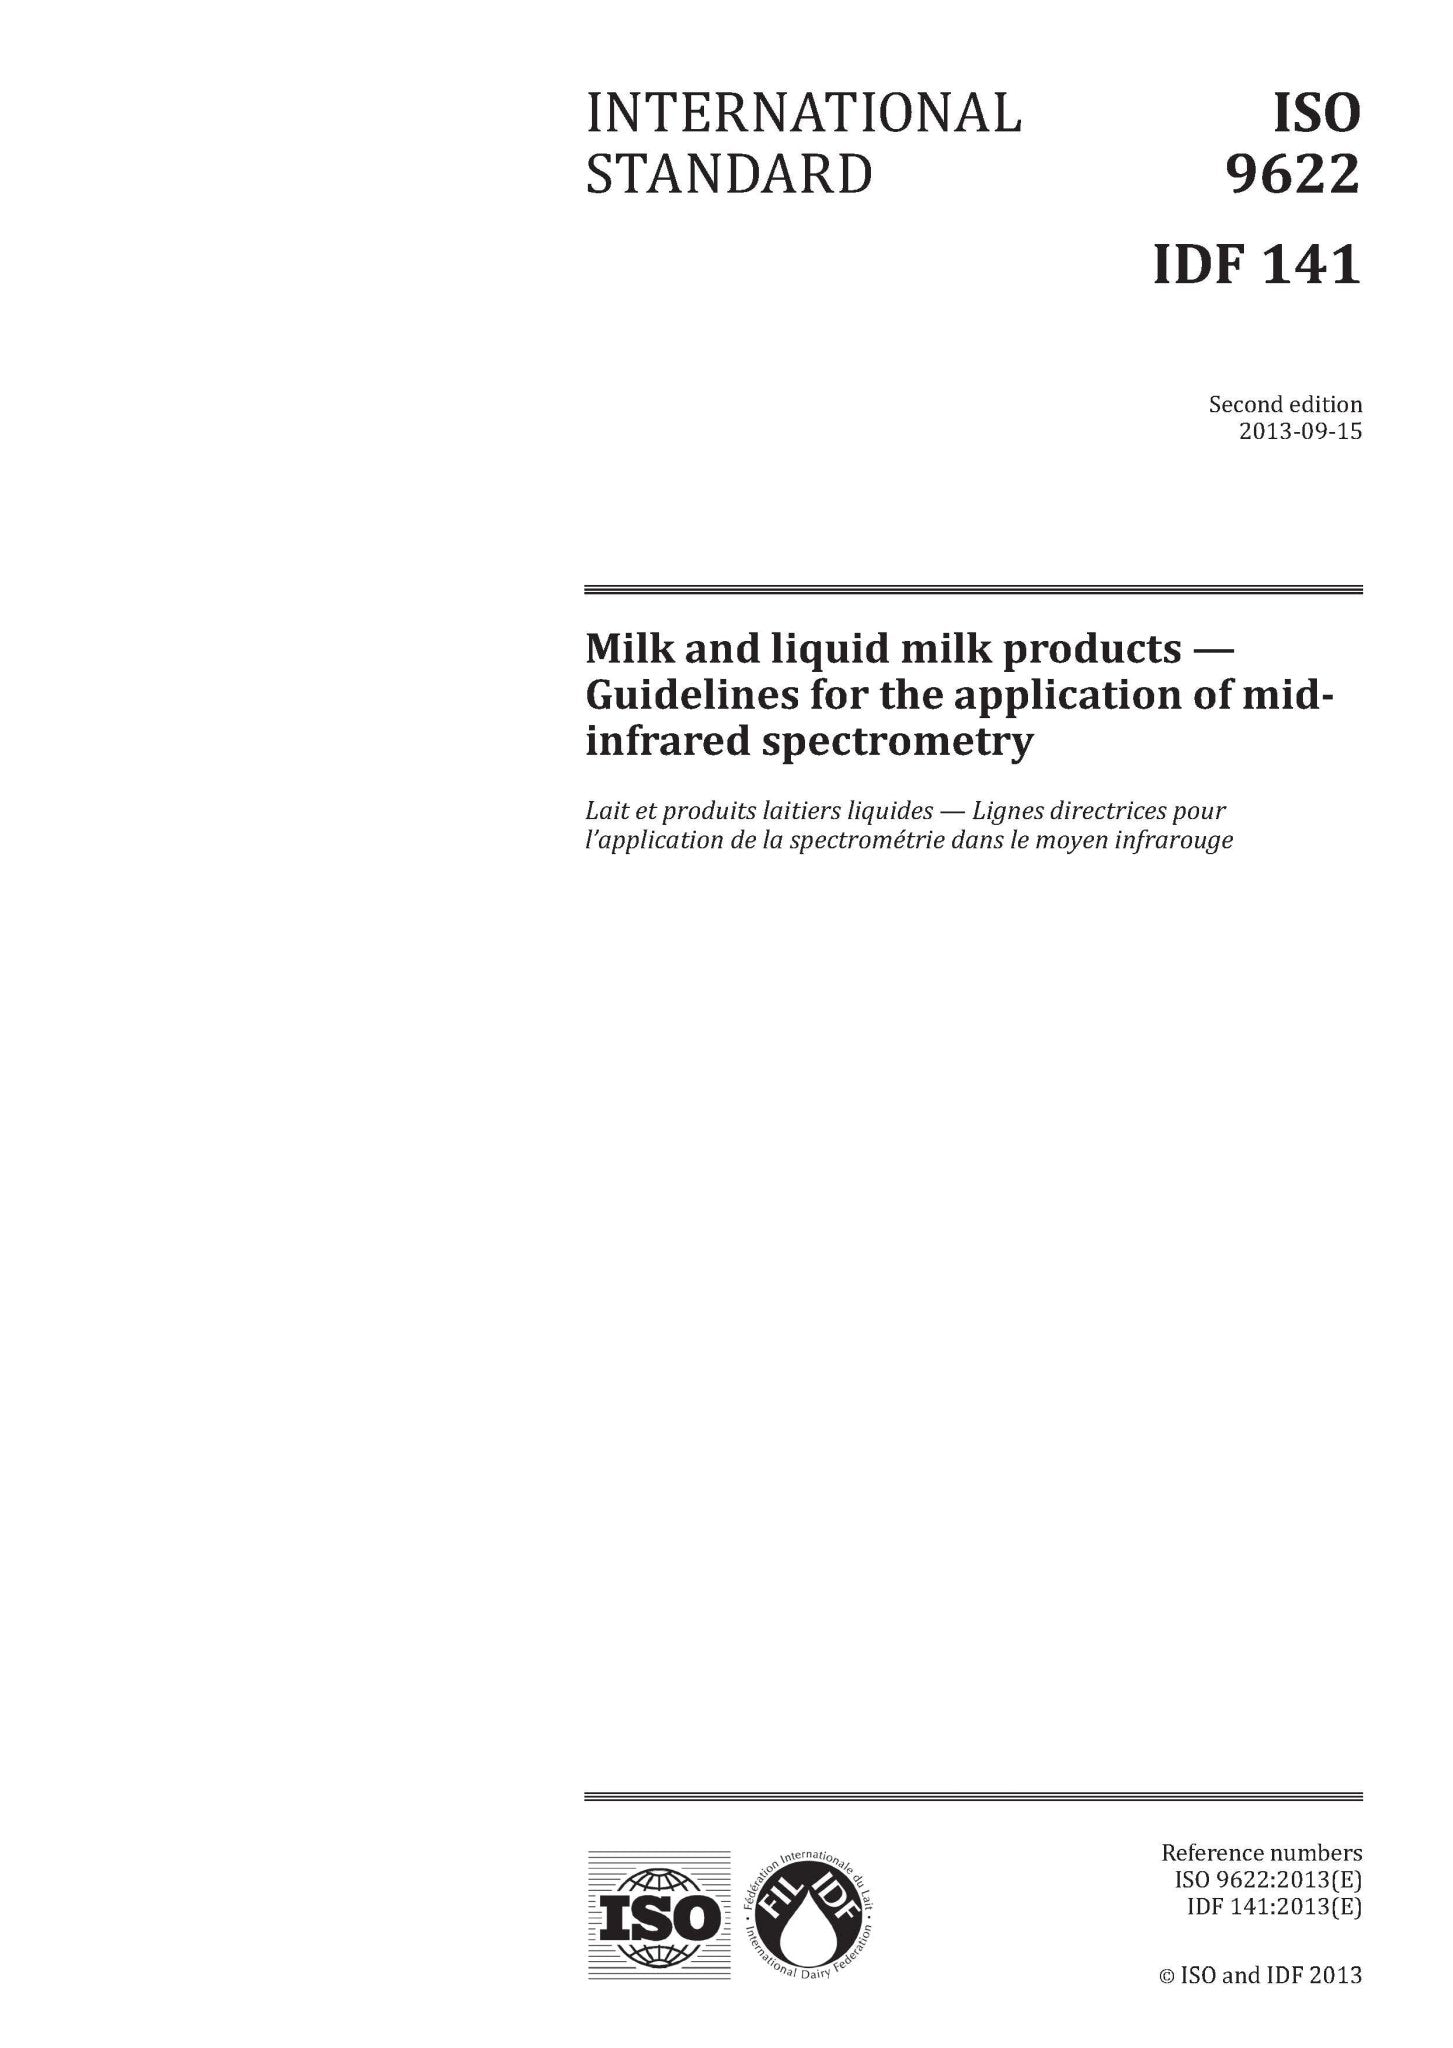 ISO 9622 | IDF 141: 2013 - Milk and liquid milk products - Guidelines for the application of mid-infrared spectrometry - FIL-IDF